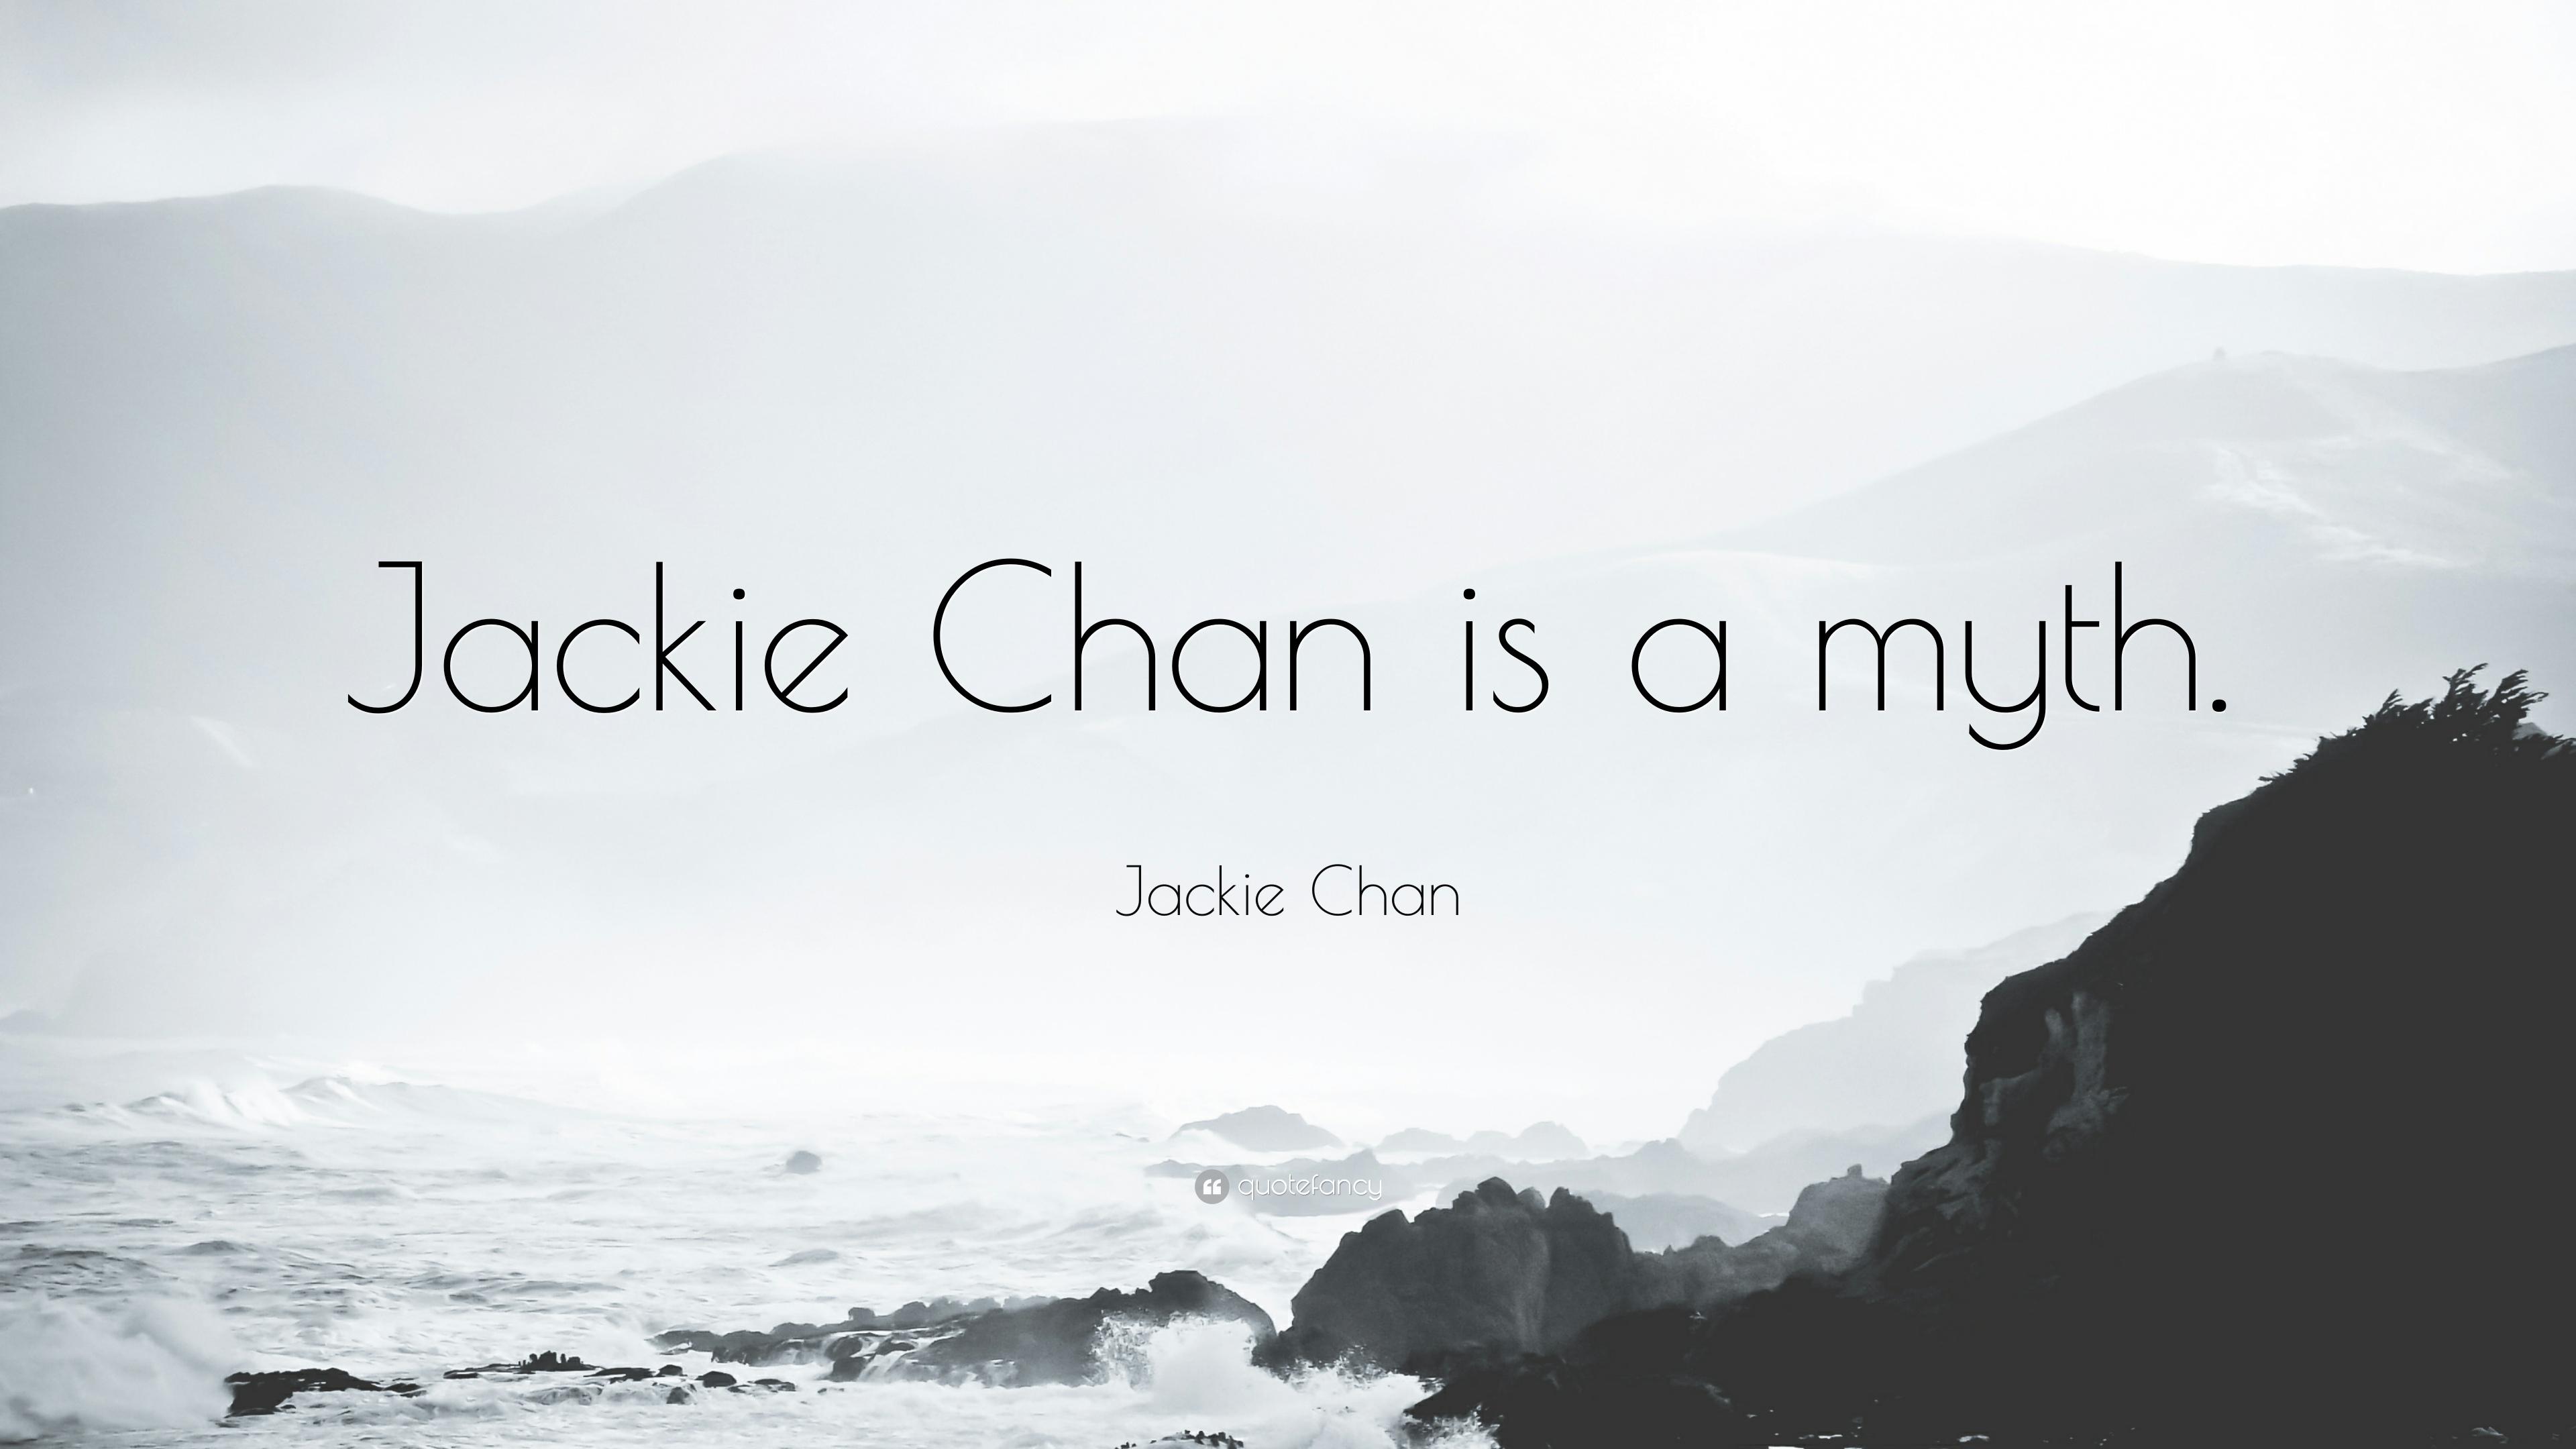 Jackie Chan Quote: “Jackie Chan is a myth.” (7 wallpaper)